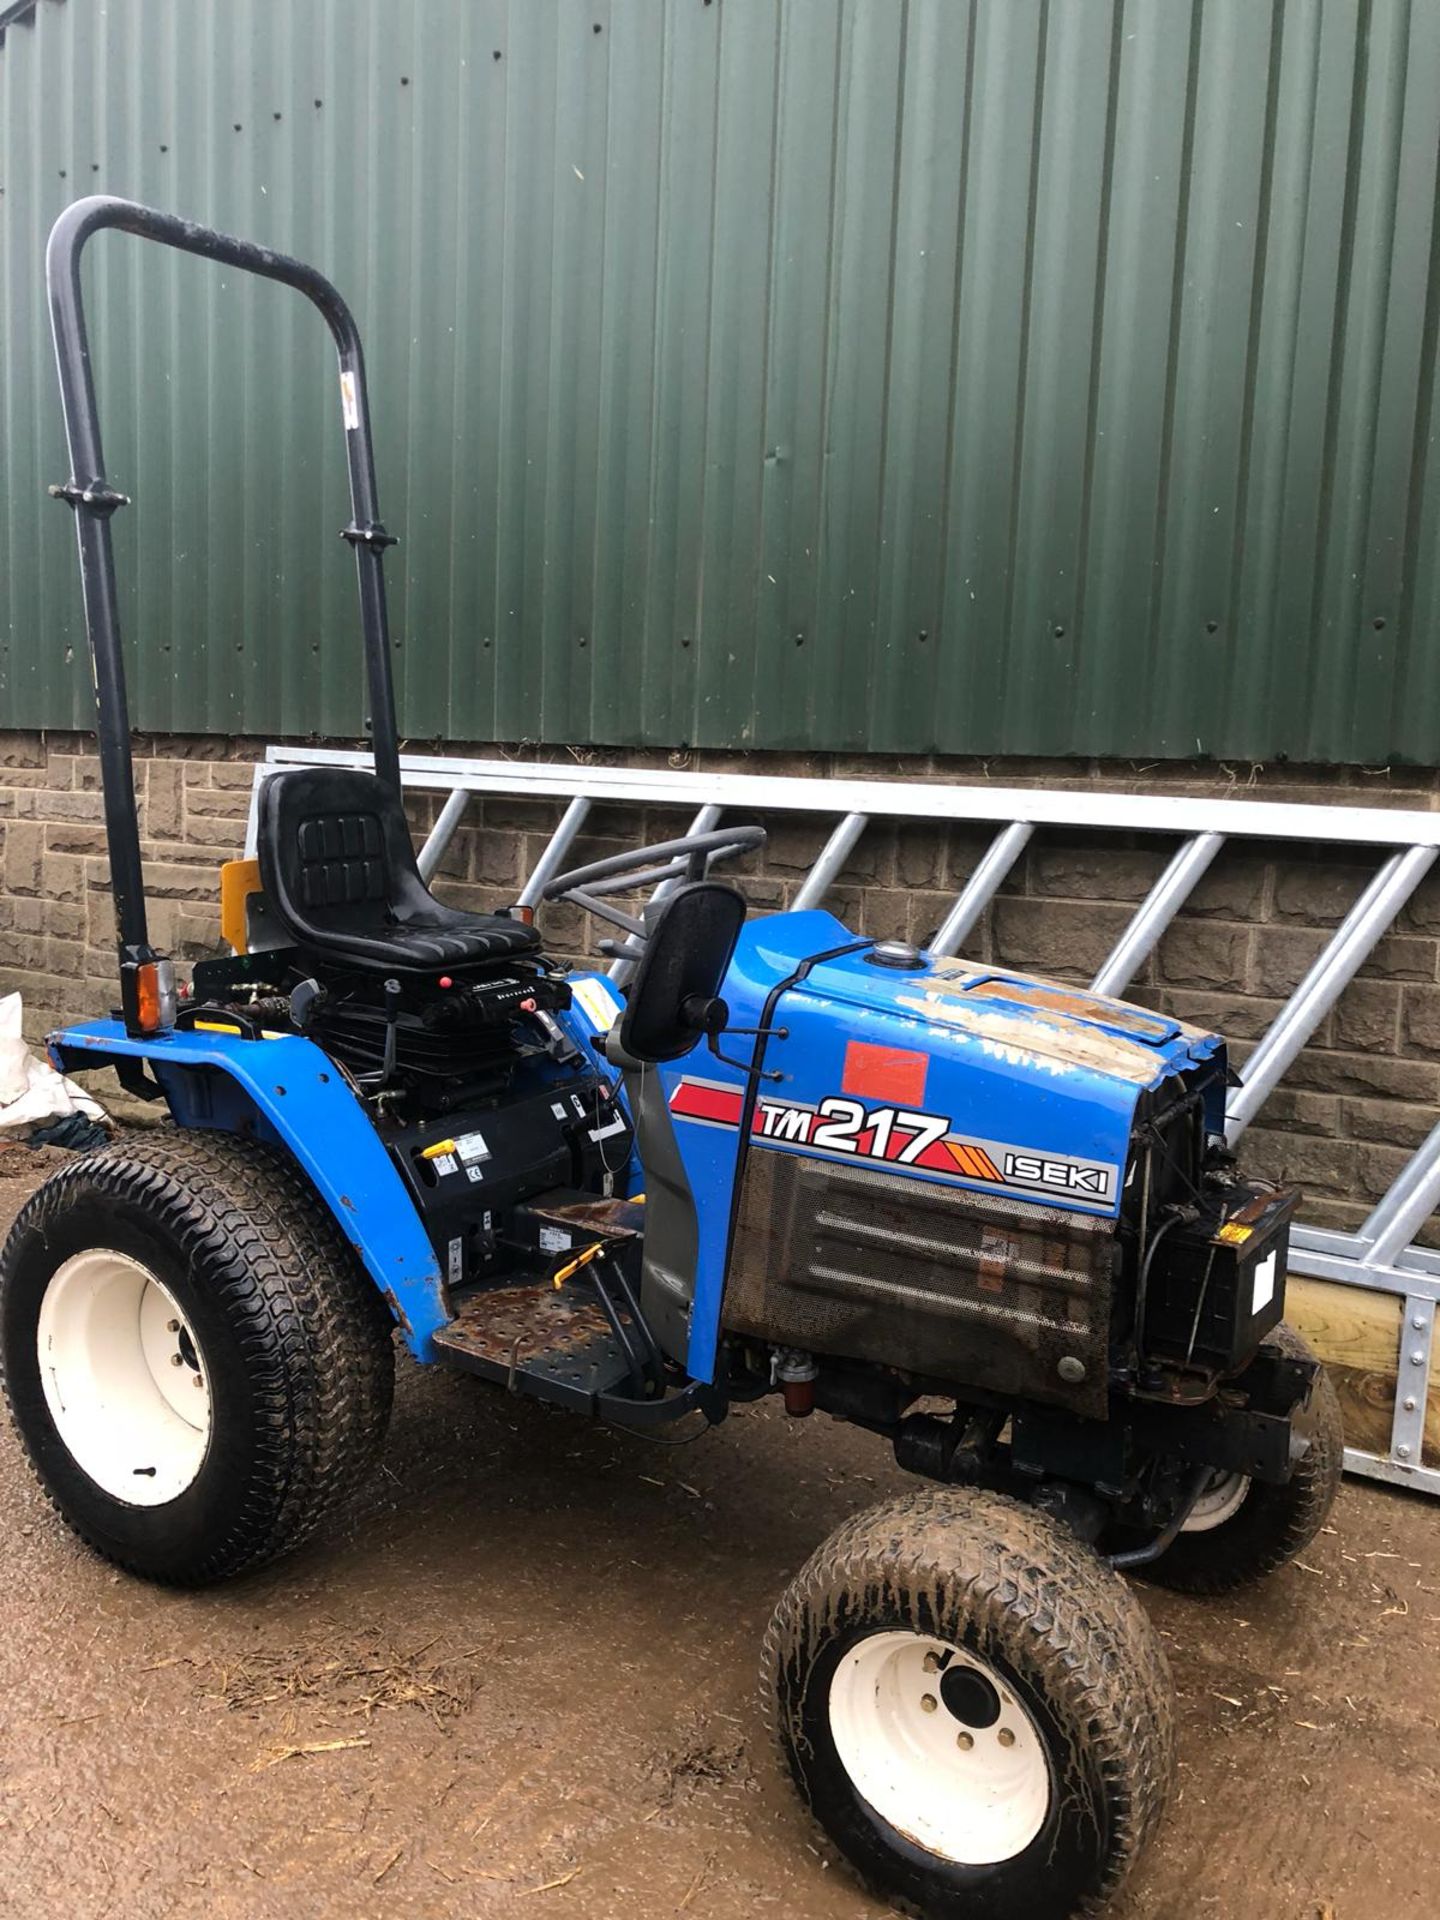 2000 ISEKI TM217 BLUE DIESEL COMPACT UTILITY TRACTOR WITH ROLL BAR, 3 POINT LINKAGE ETC *PLUS VAT* - Image 6 of 16